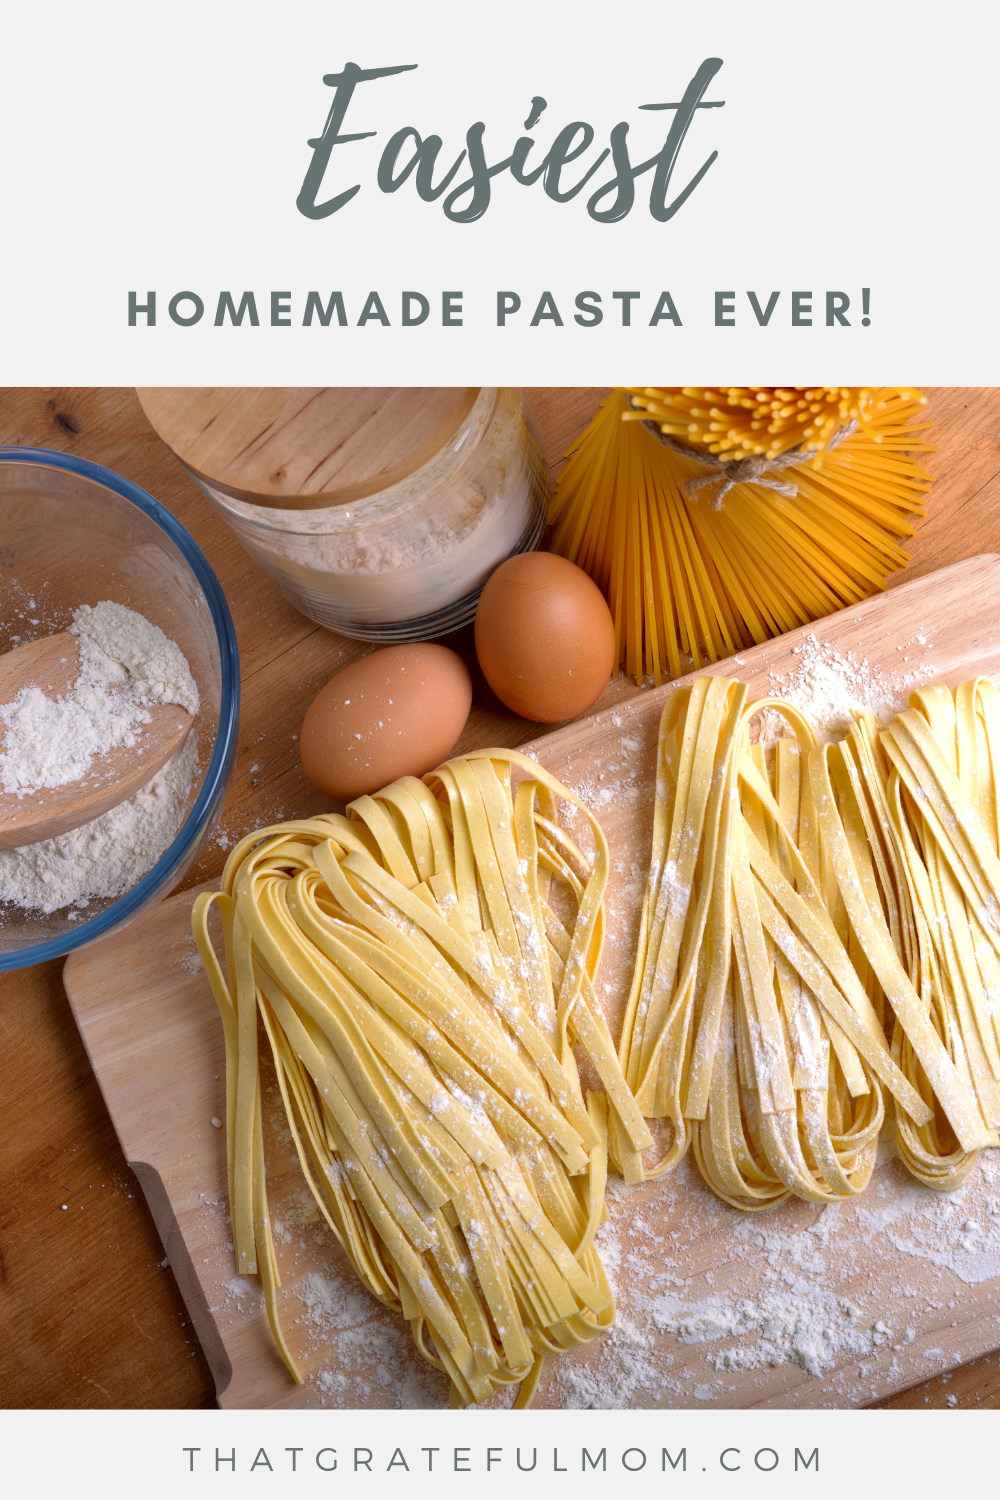 homemade pasta is easy to make with this recipe.